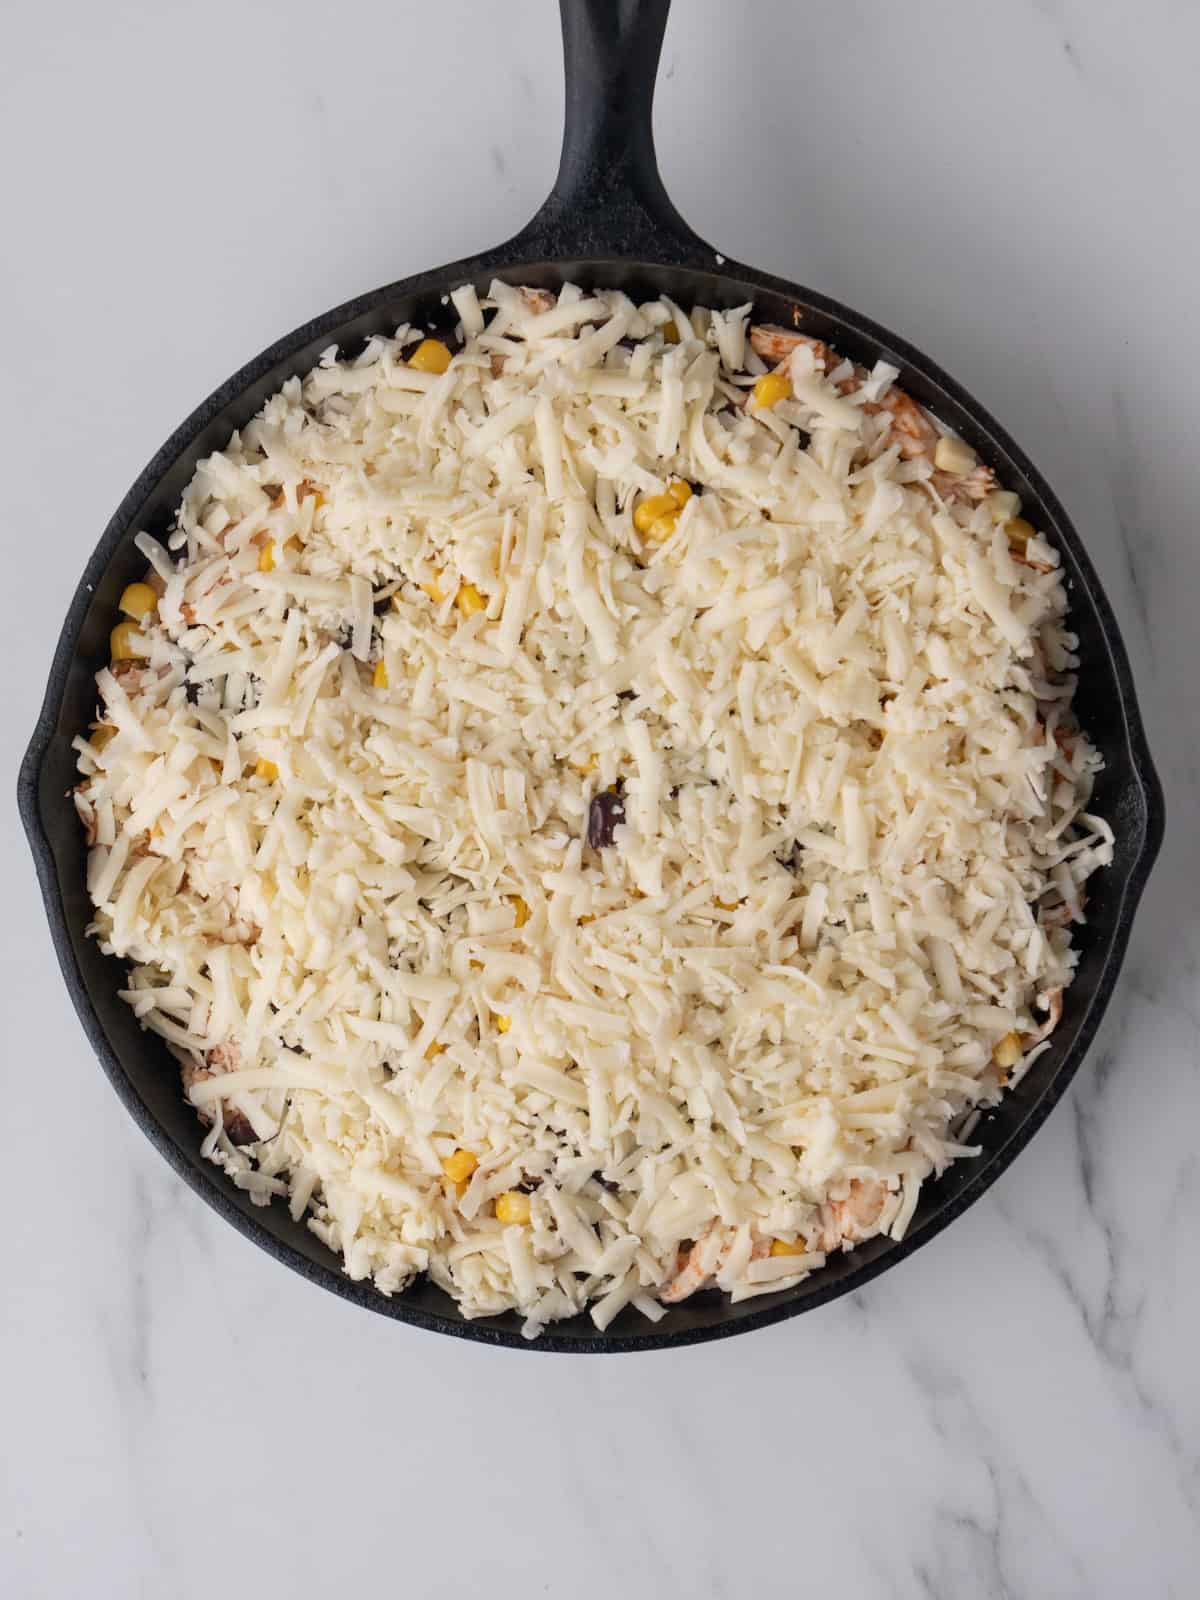 A skillet with chipotle chicken enchilada bake assembled and ready to be baked.